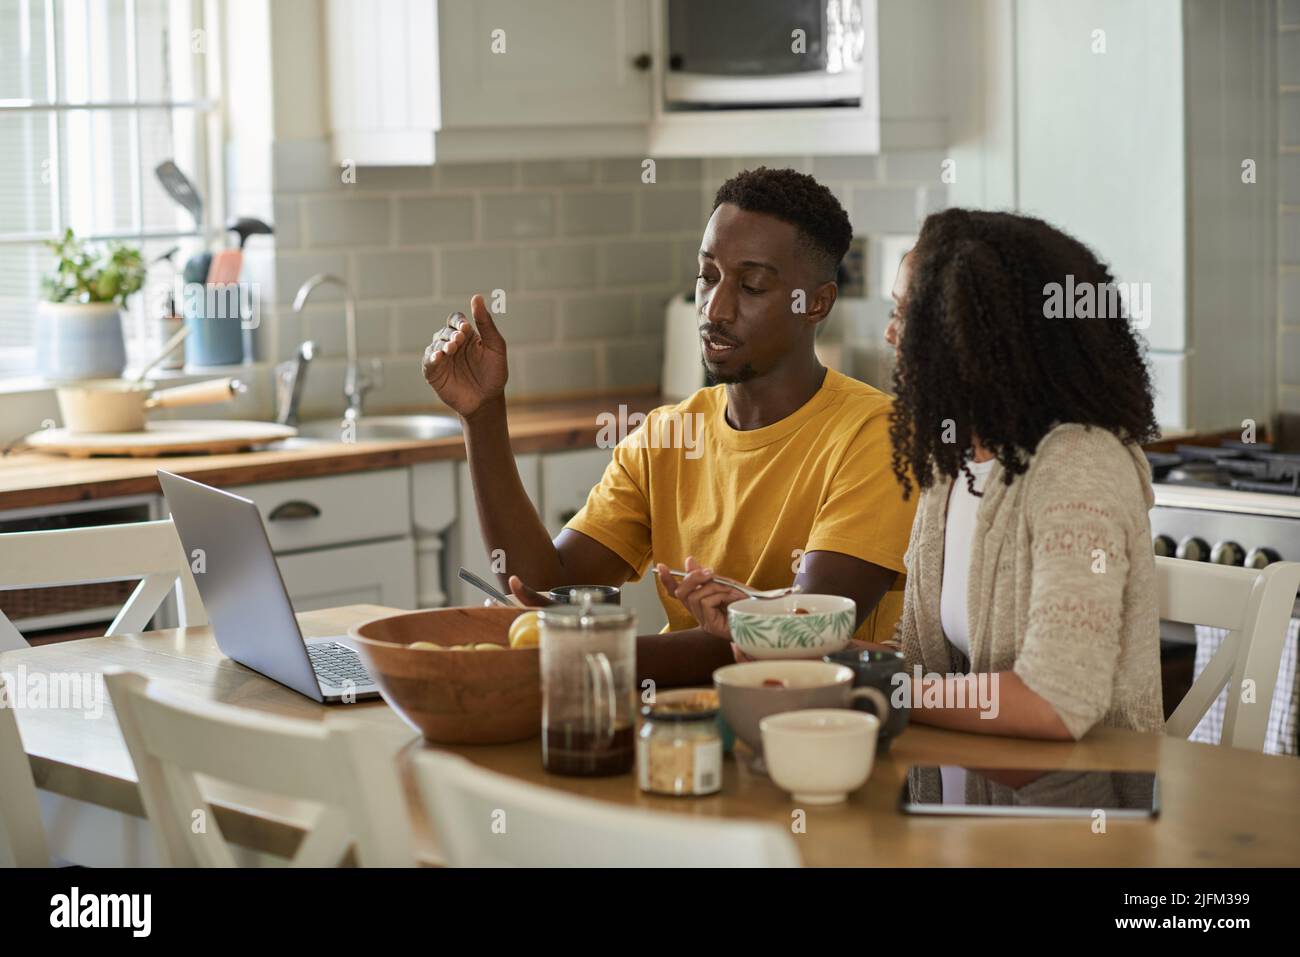 Young multiethnic couple talking and working on a laptop during breakfast together at a table in their kitchen in the morning Stock Photo